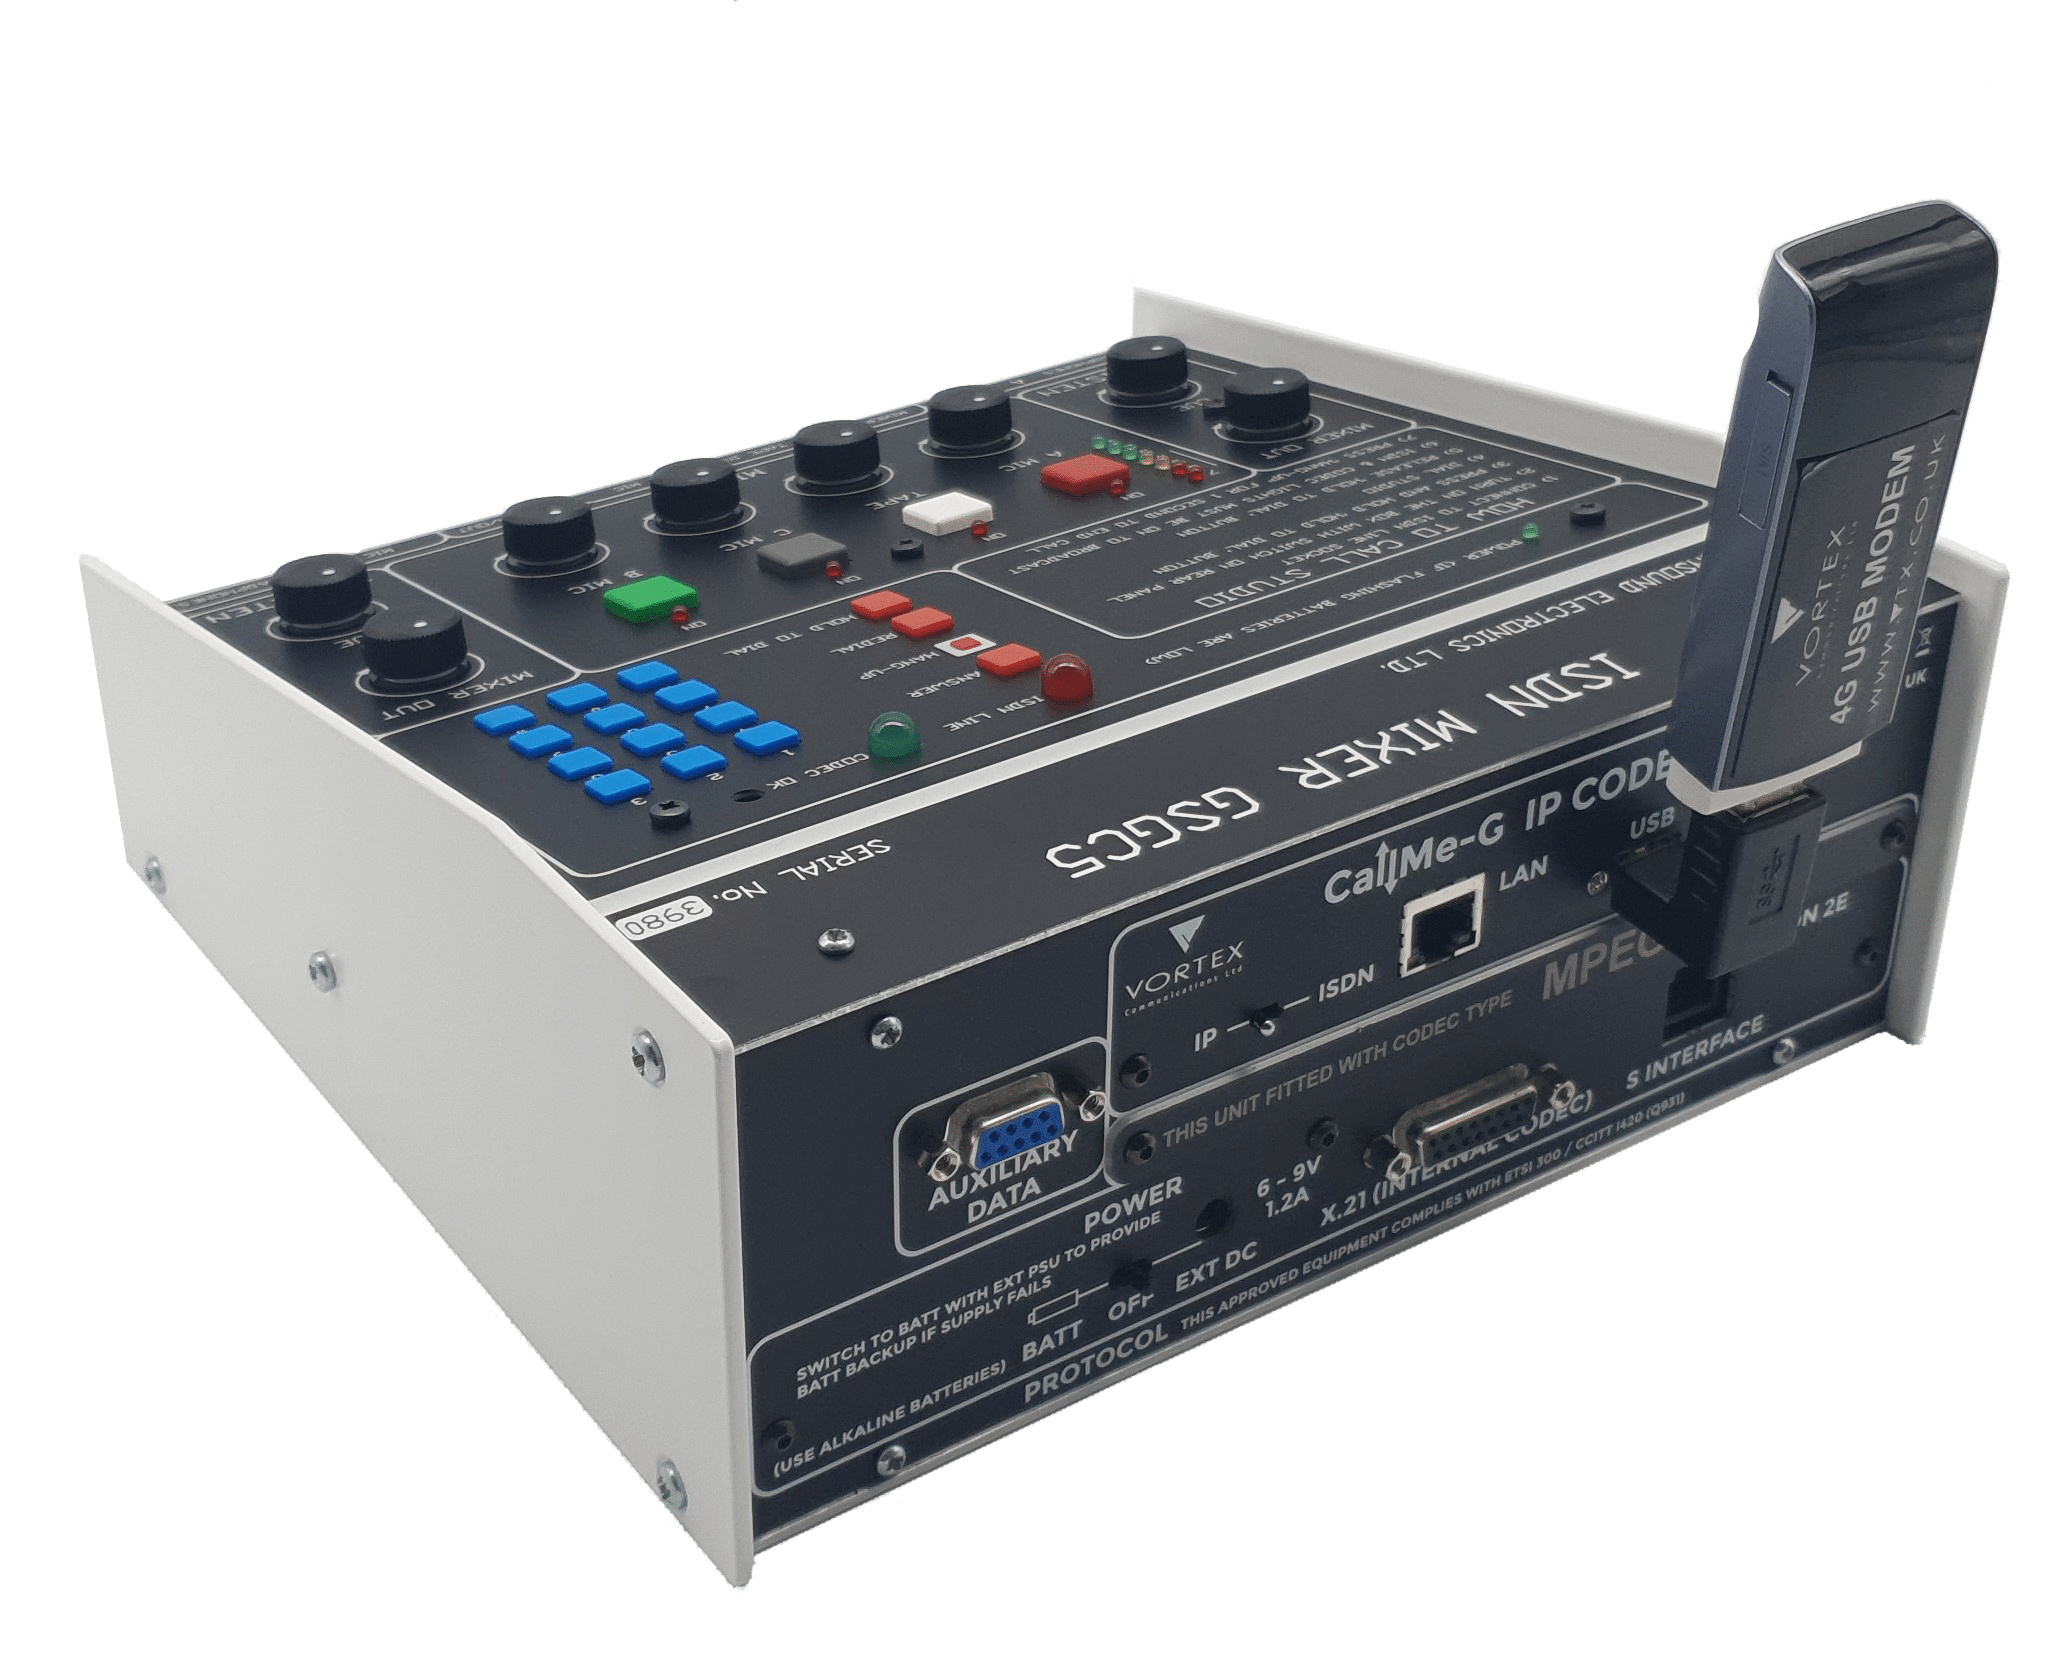 Glensound GC5 ISDN Broadcast Mixer with CallMe-G unit installed